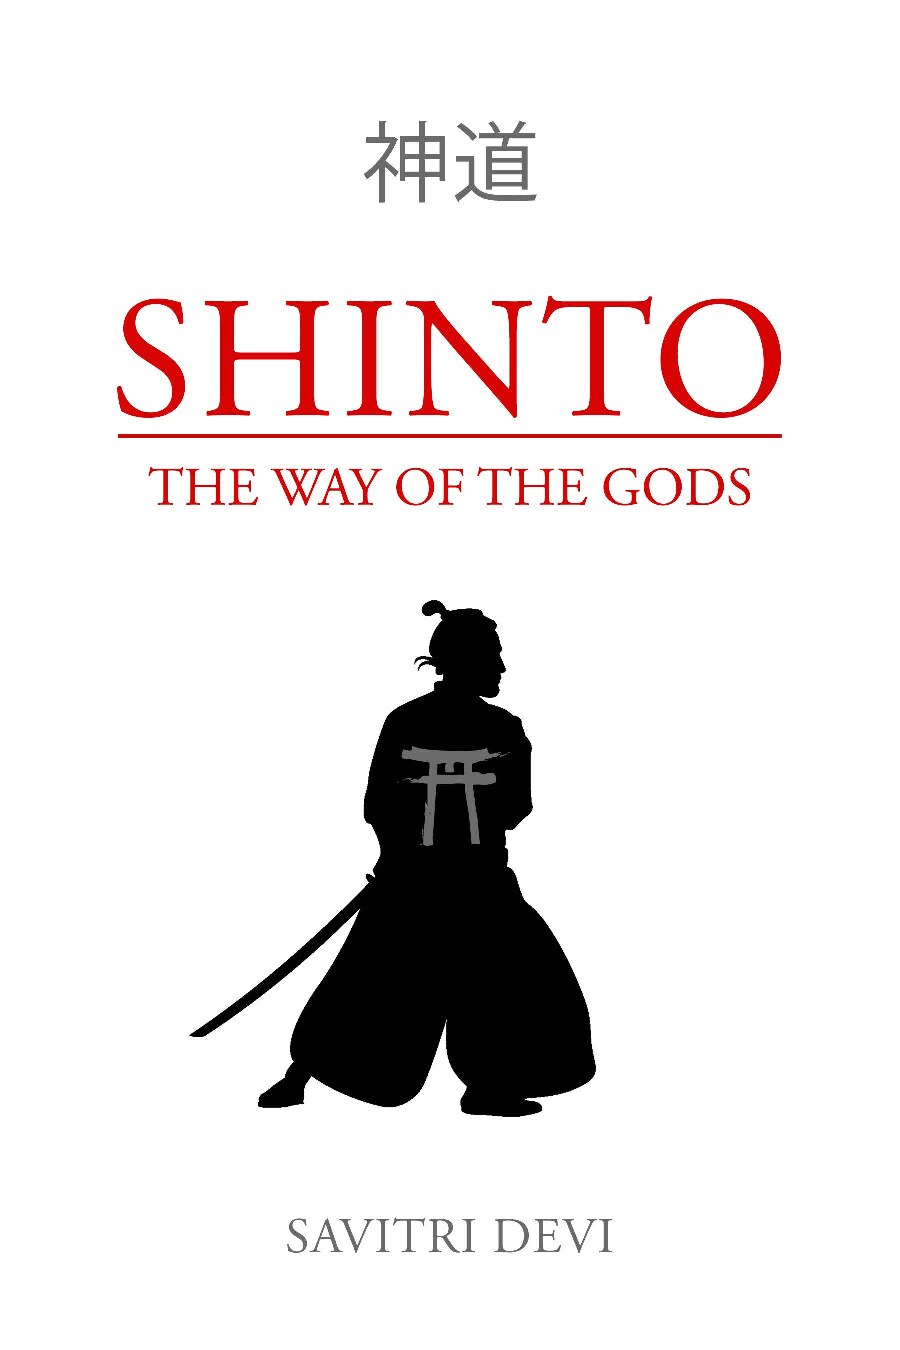 Shinto: The Way of the Gods